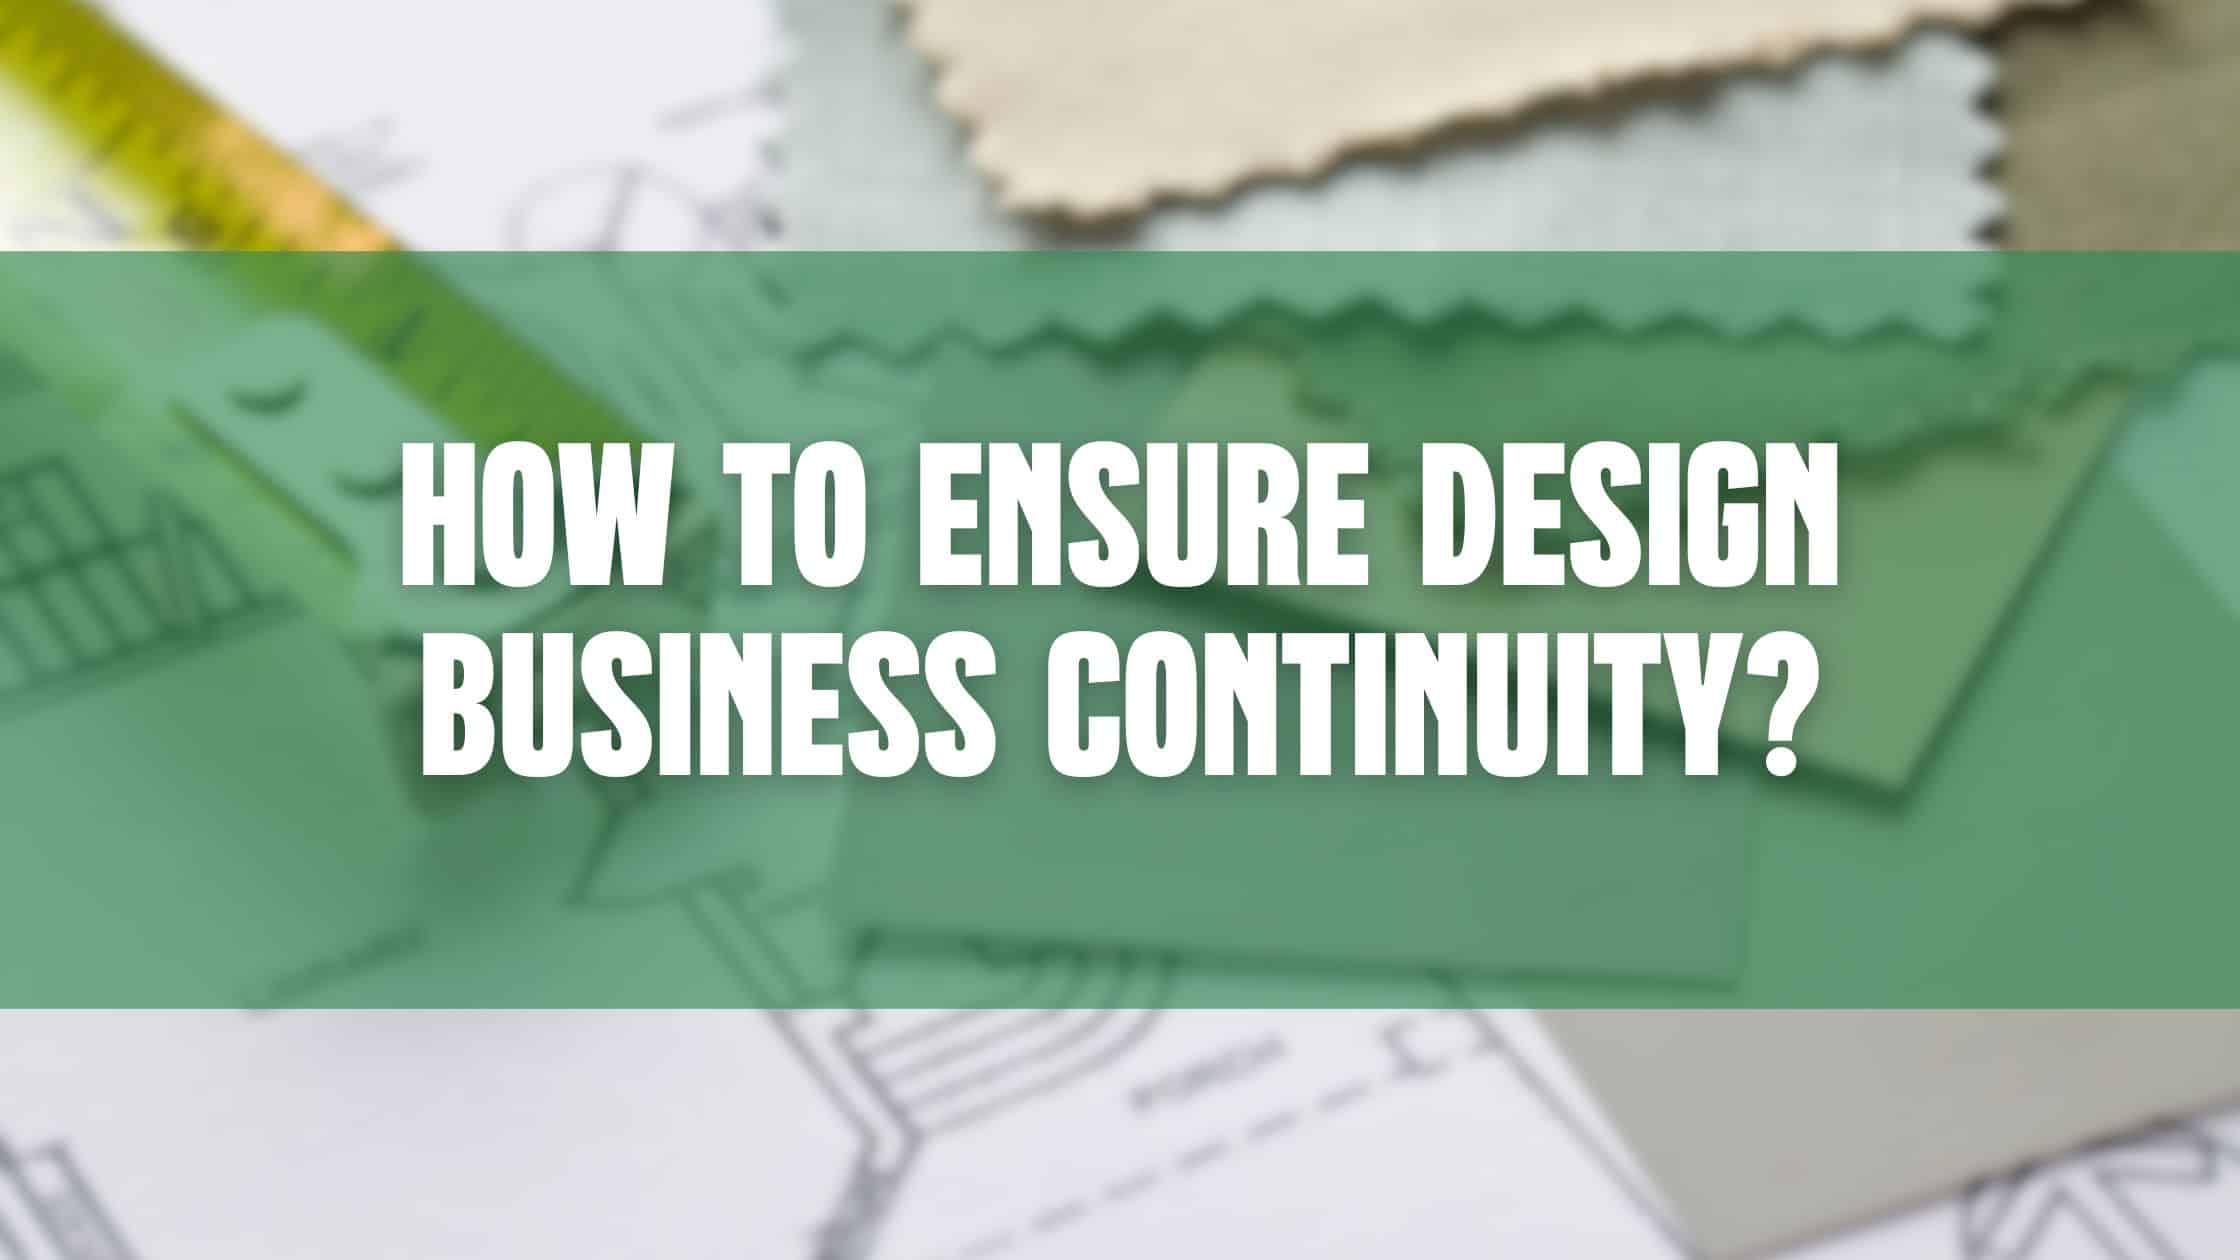 how to ensure design business continuity?